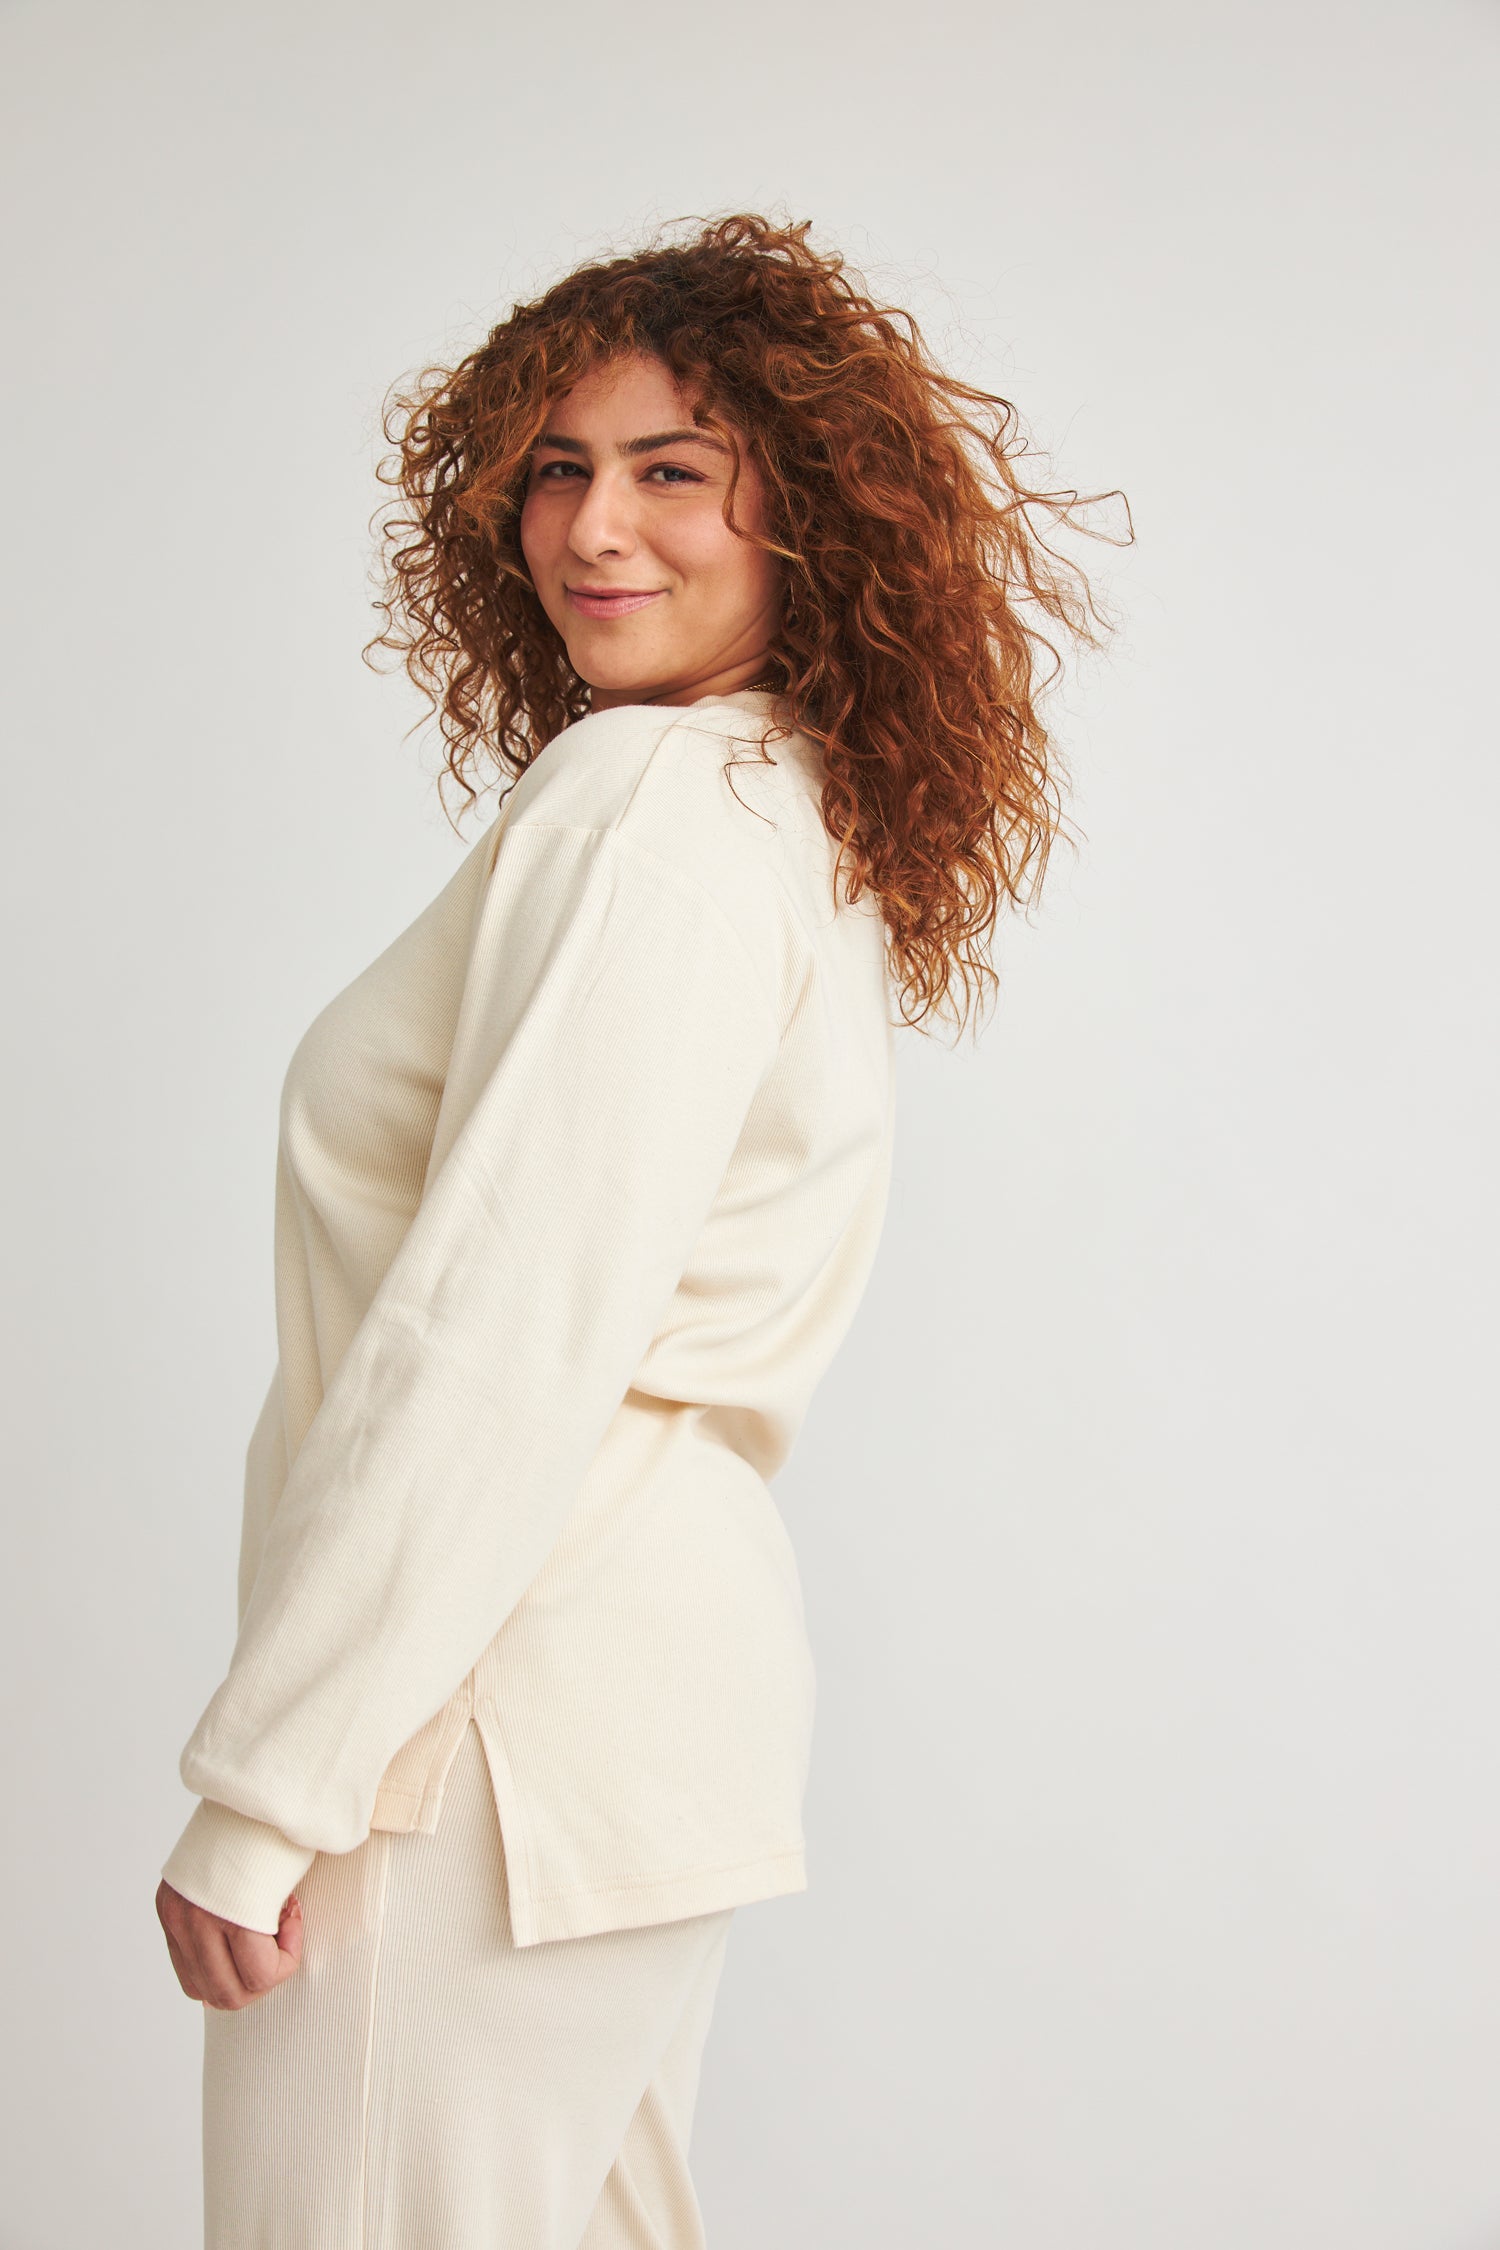 Natural-colored Bex sweatshirt made of organic cotton from Baige the Label